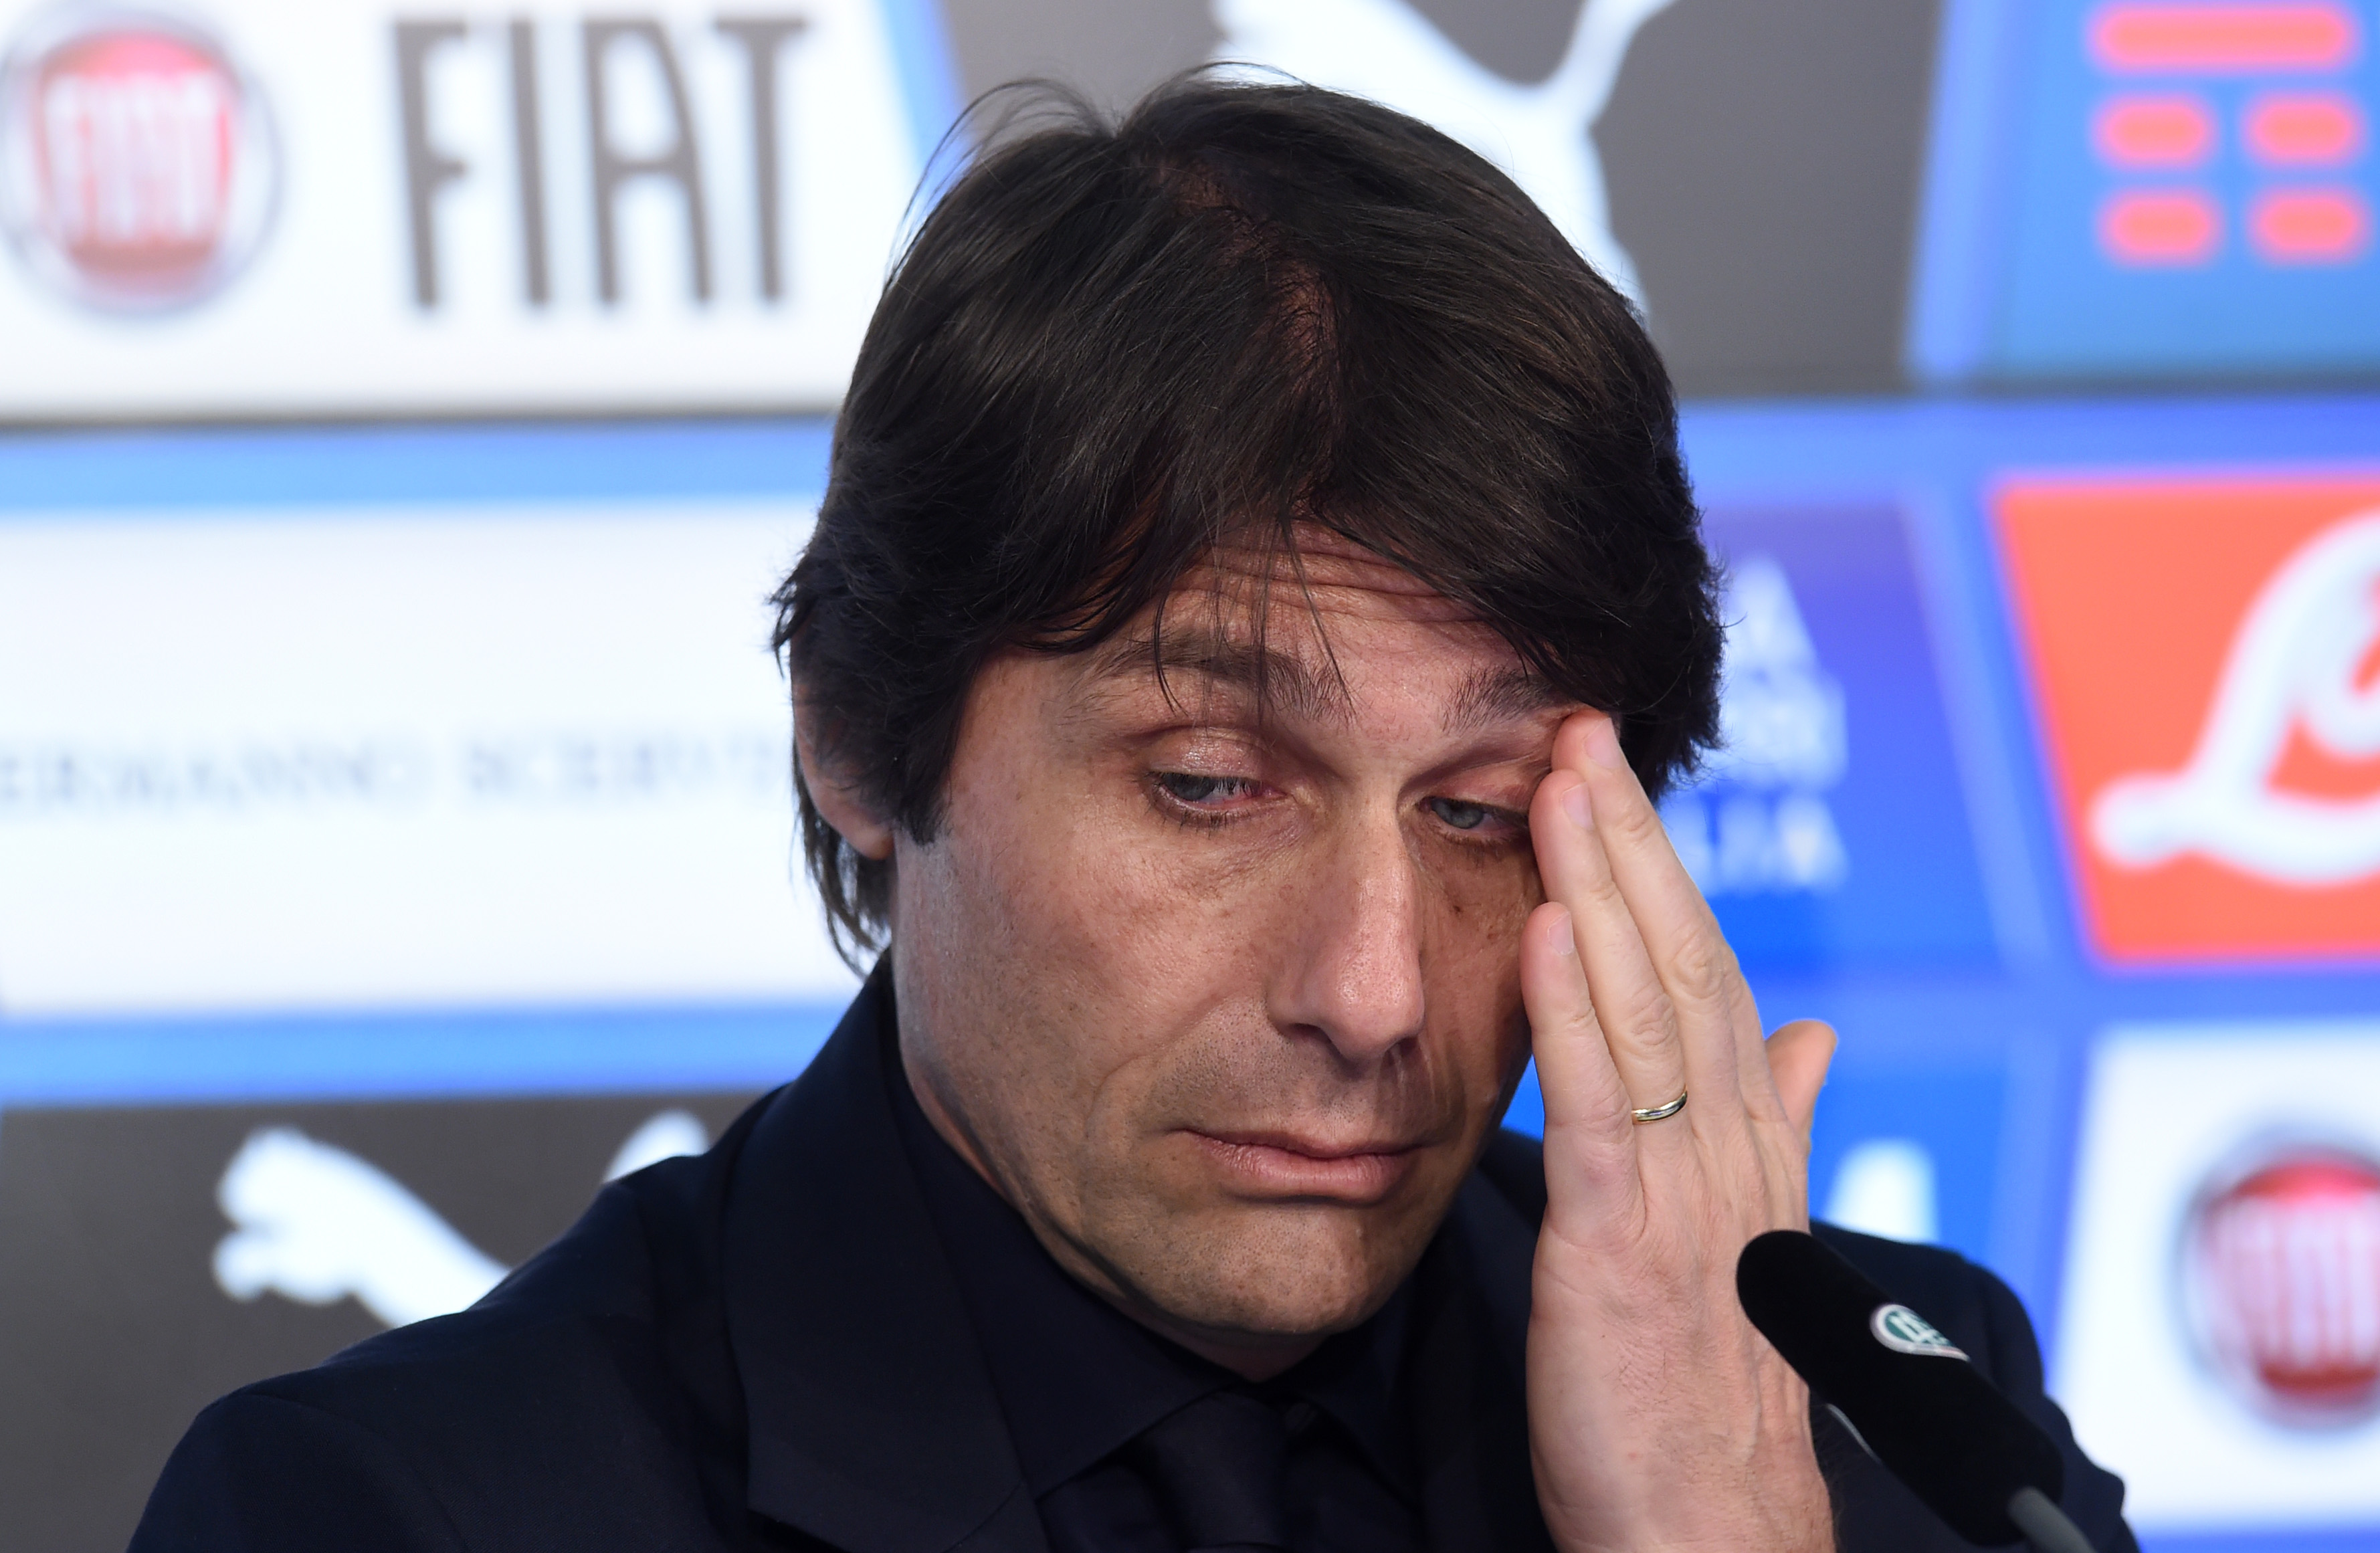 Conte short of answers after Germany debacle